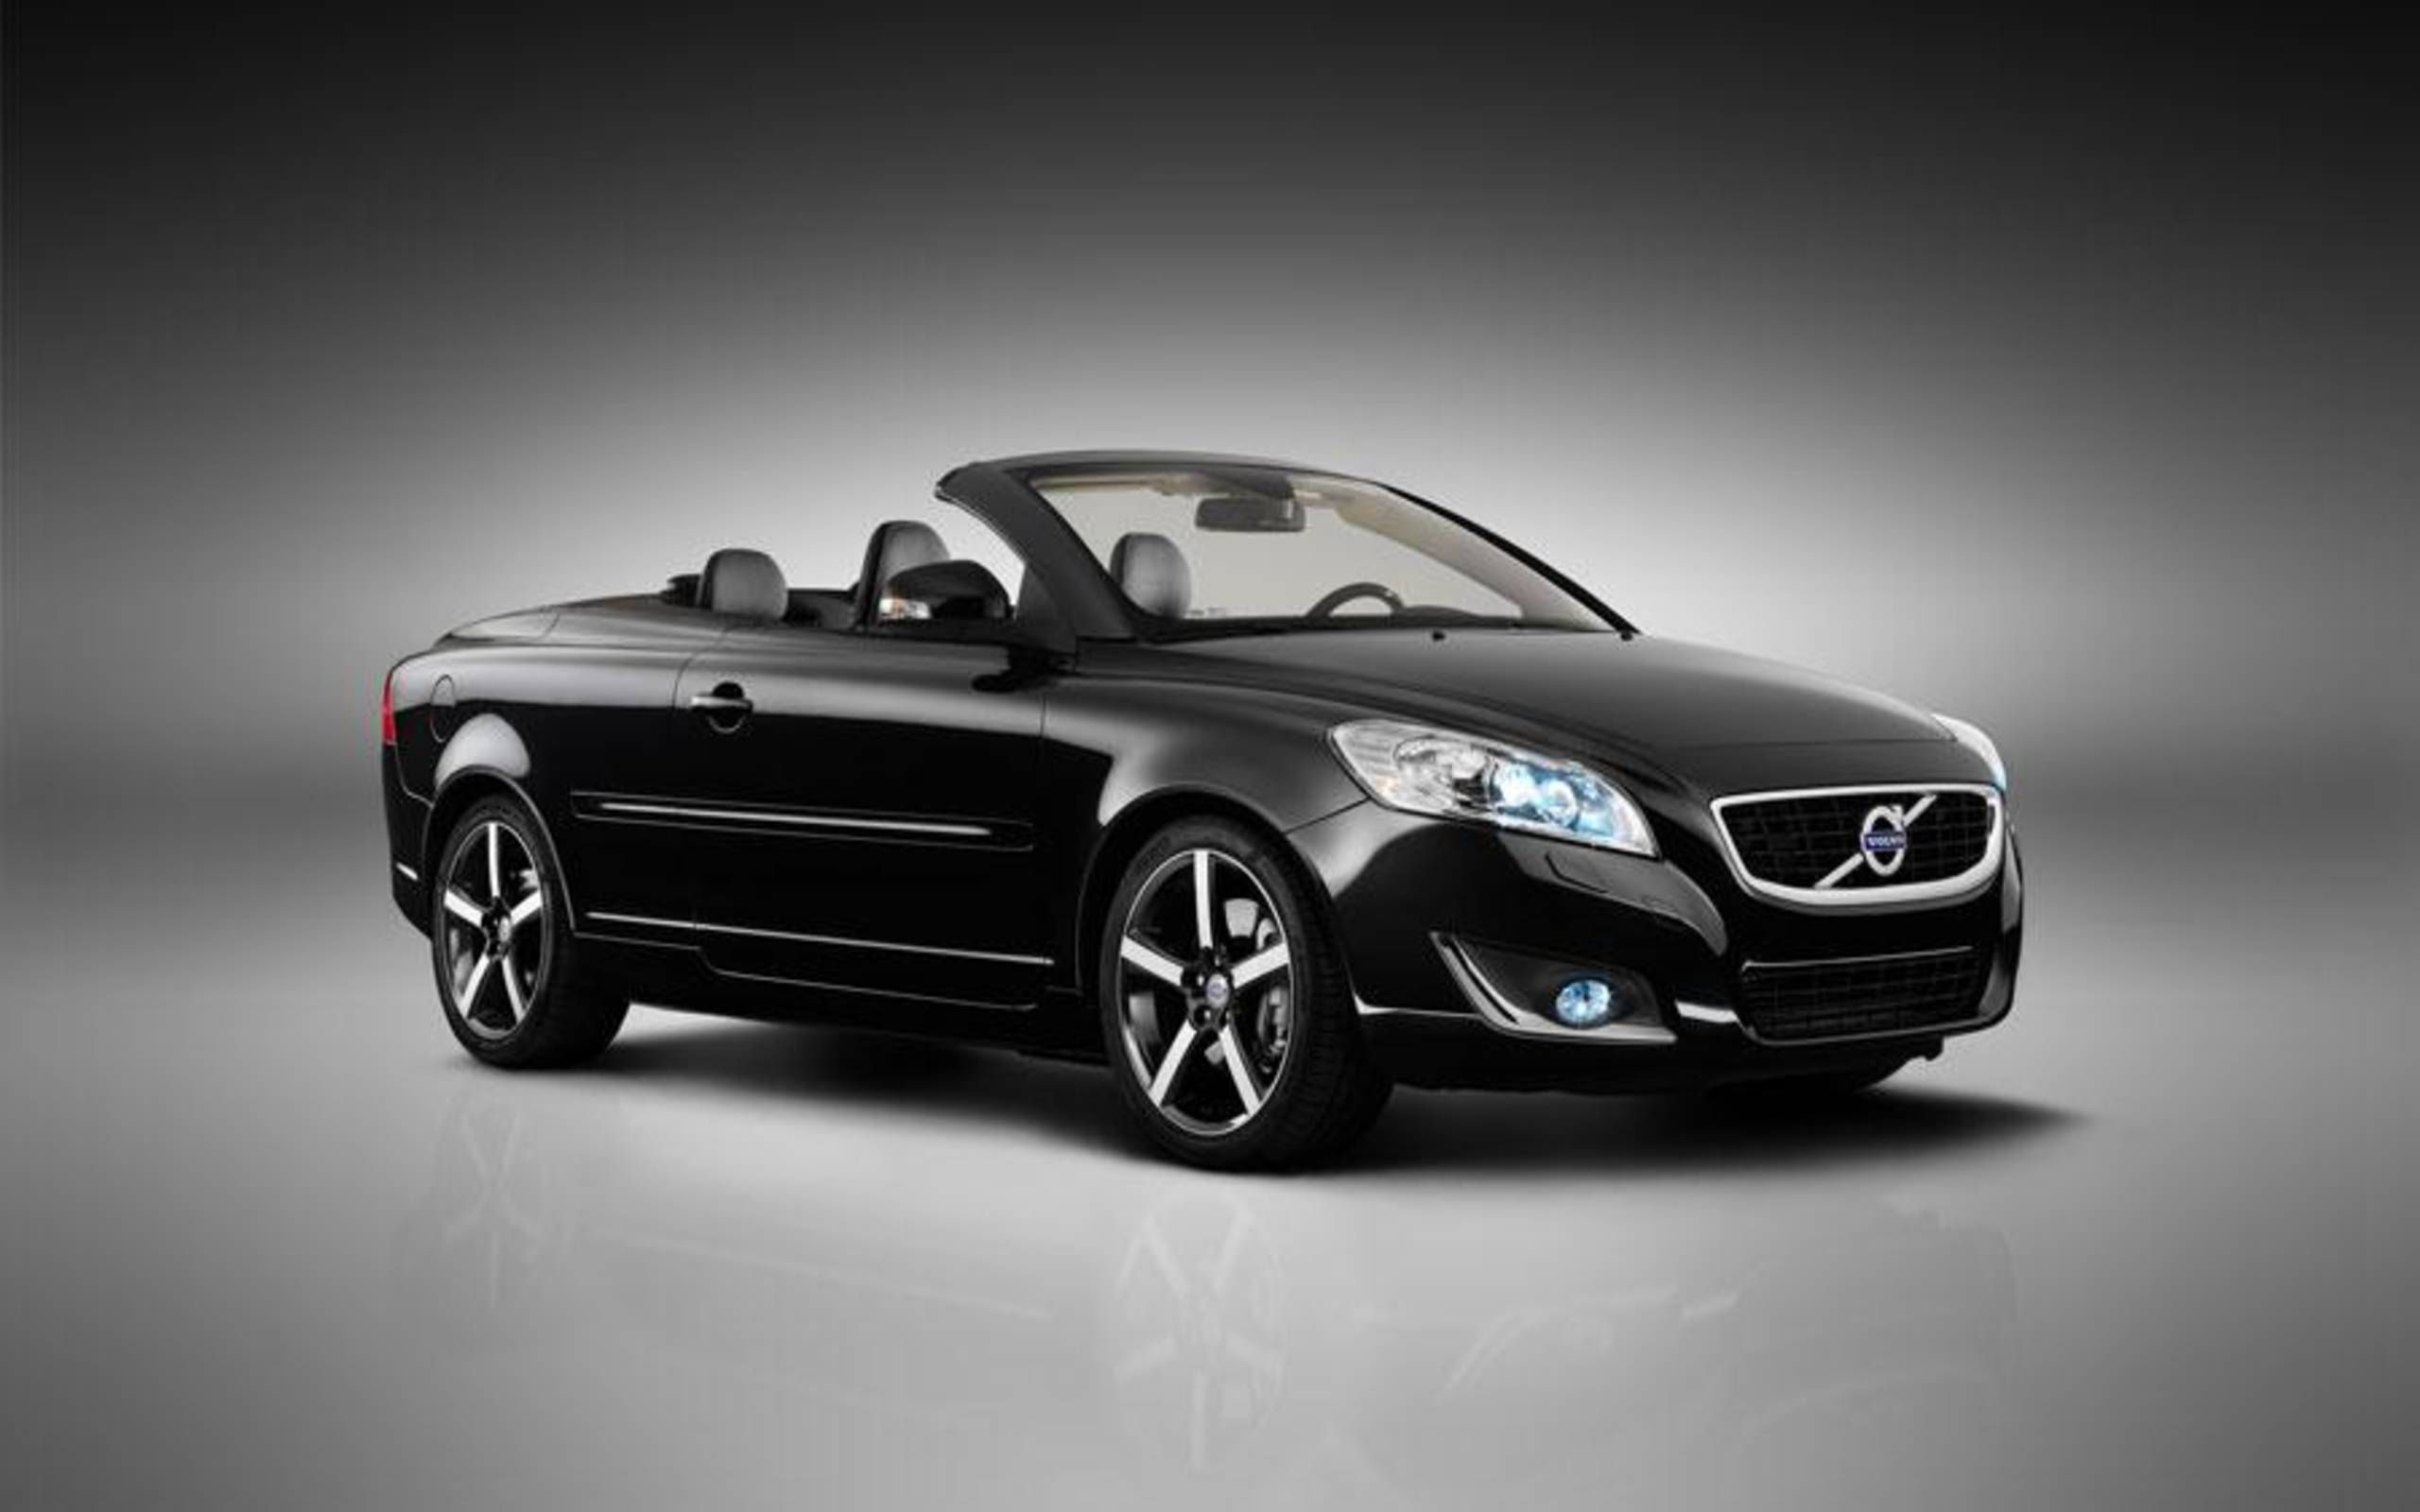 2012 Volvo C70 Inscription review notes: Not a particularly thrilling  drop-top